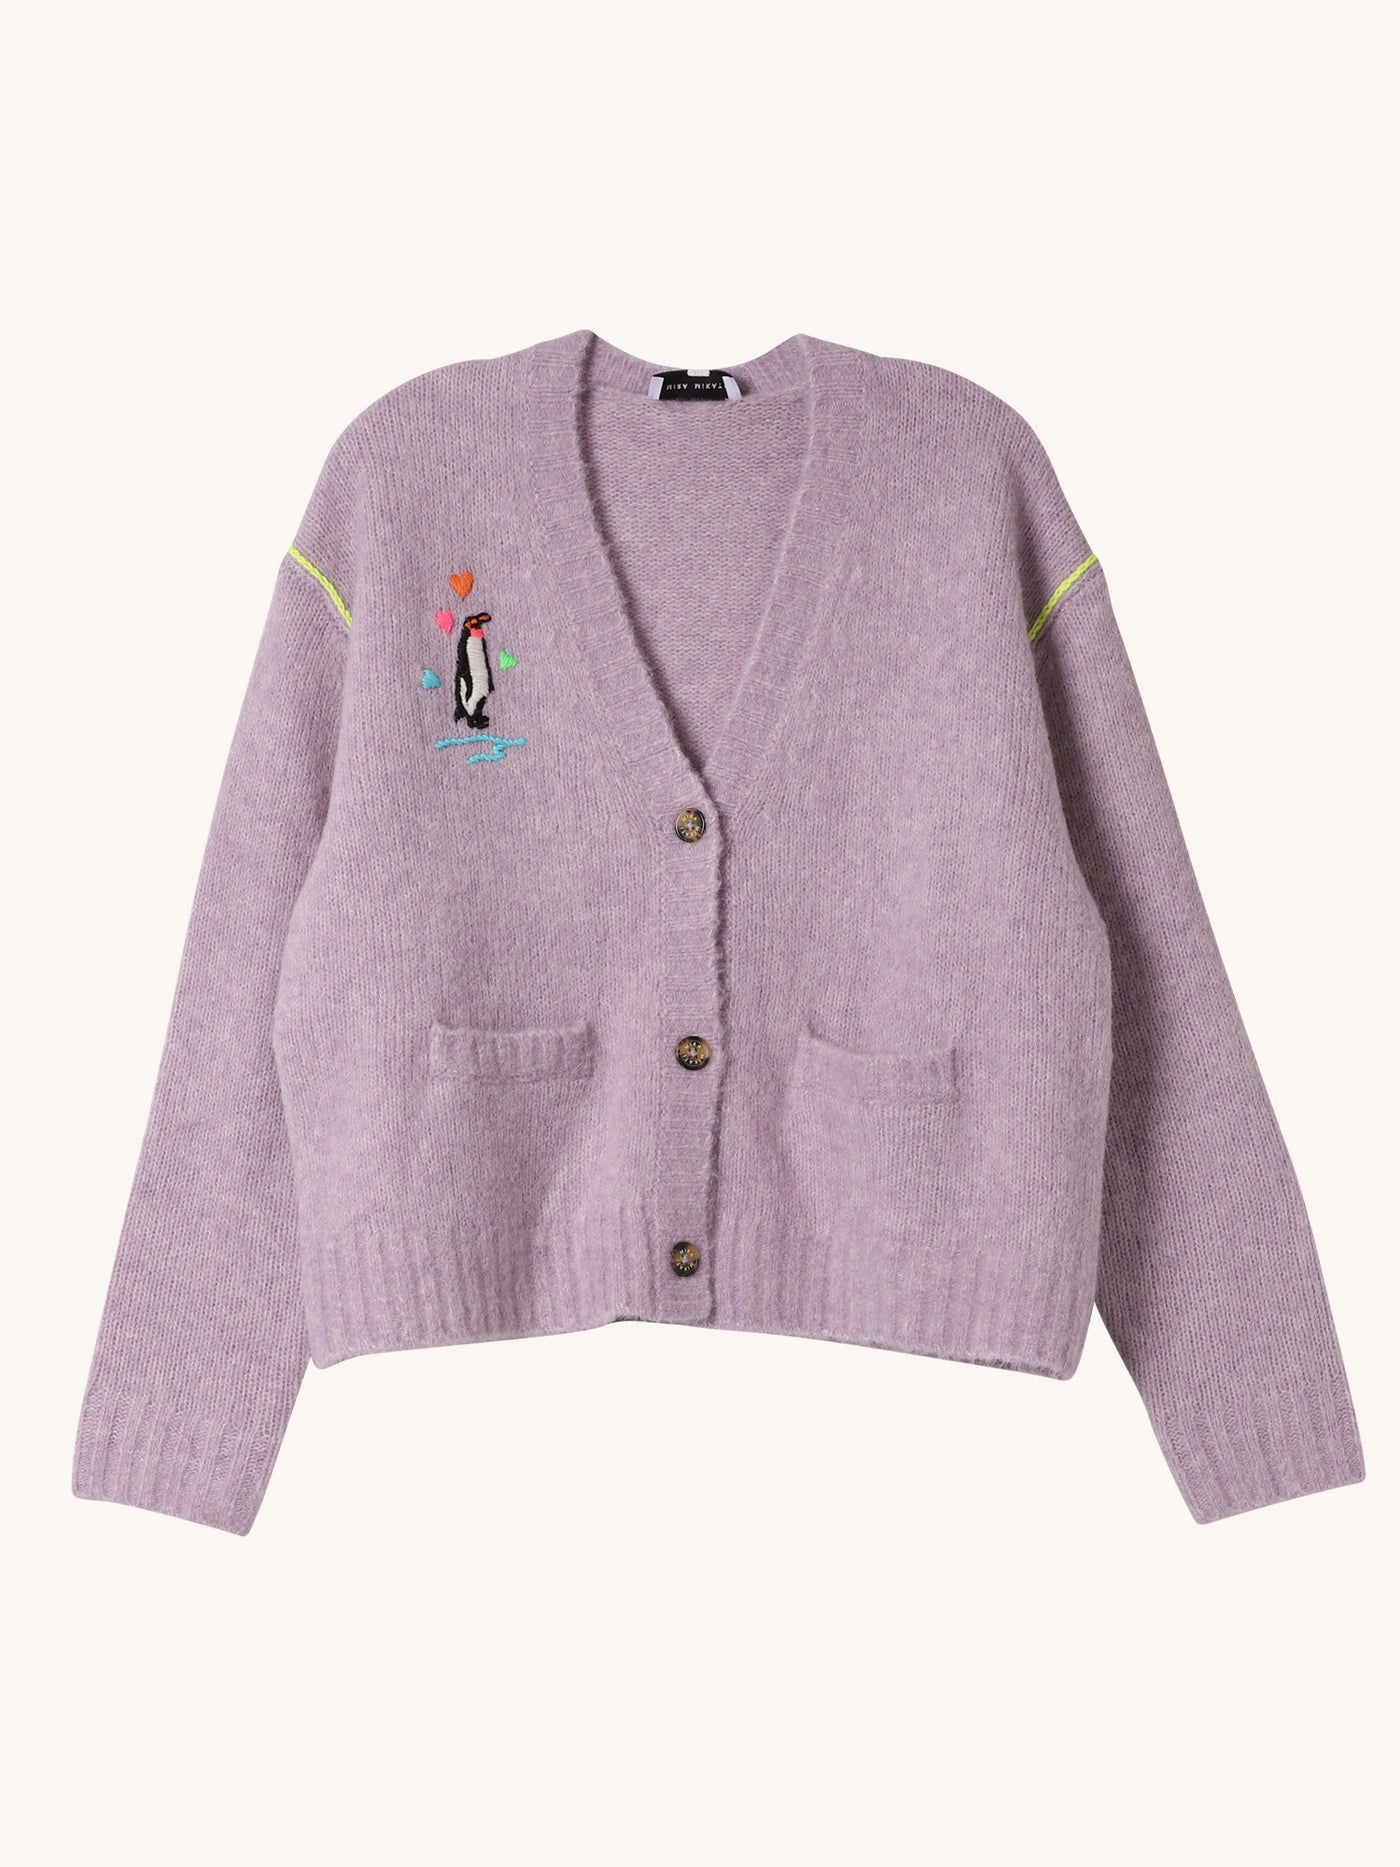 Embroidered Penguin Cardigan